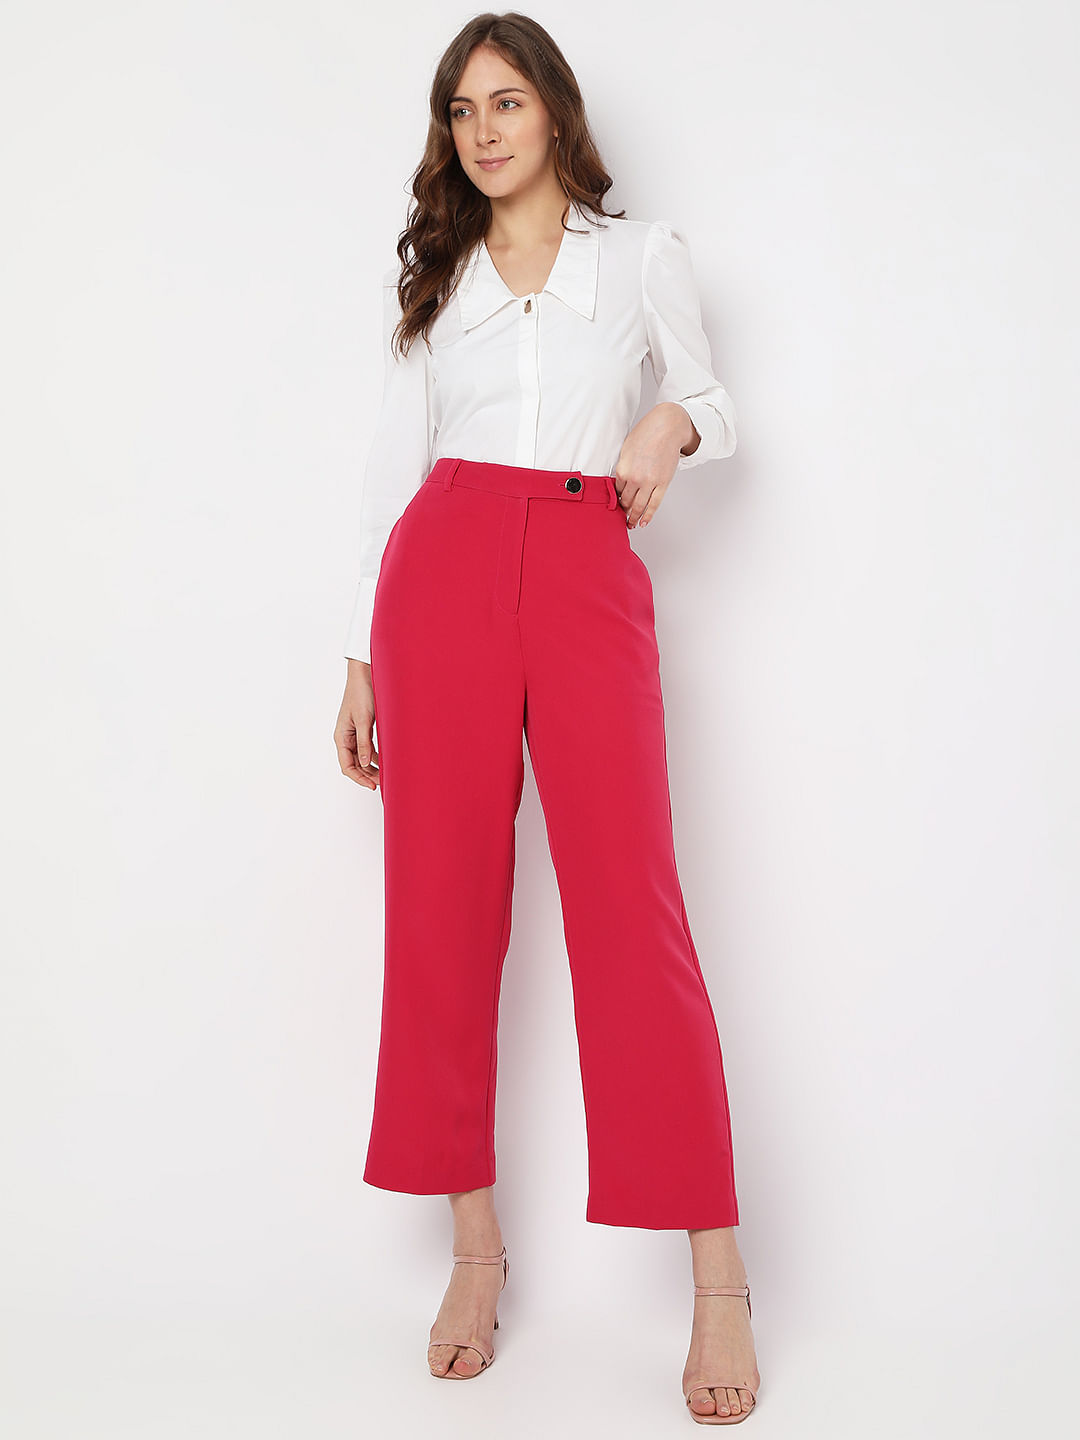 Red pants white shirt women on Stylevore